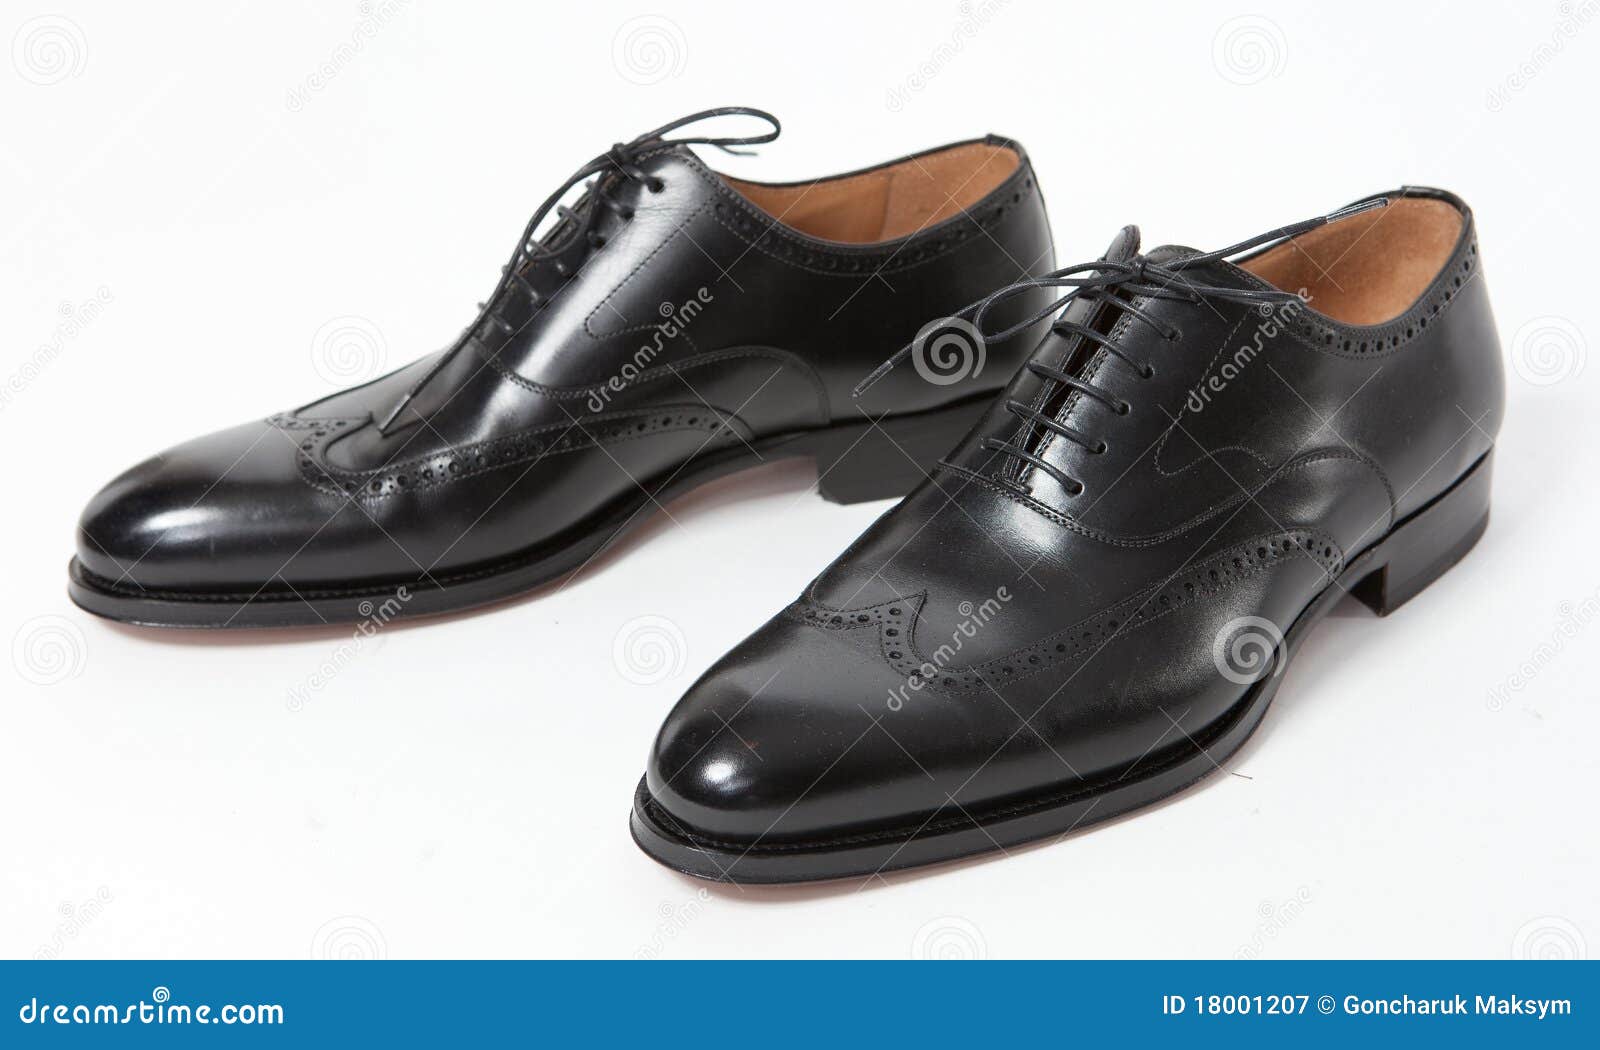 Man footwear stock image. Image of casual, business, dress - 18001207